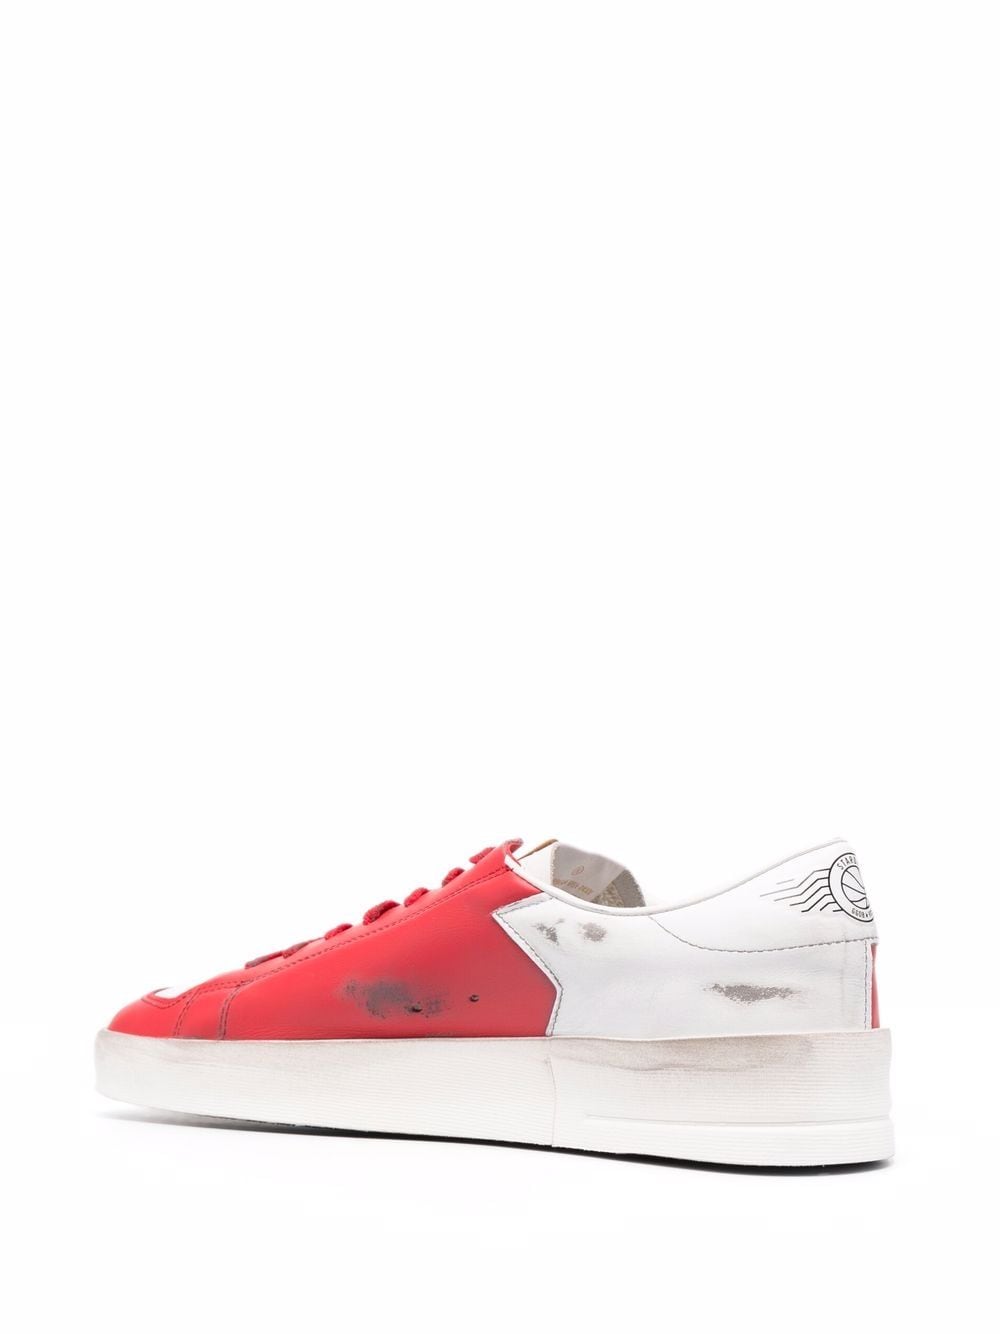 Stardan low-top lace-up sneakers